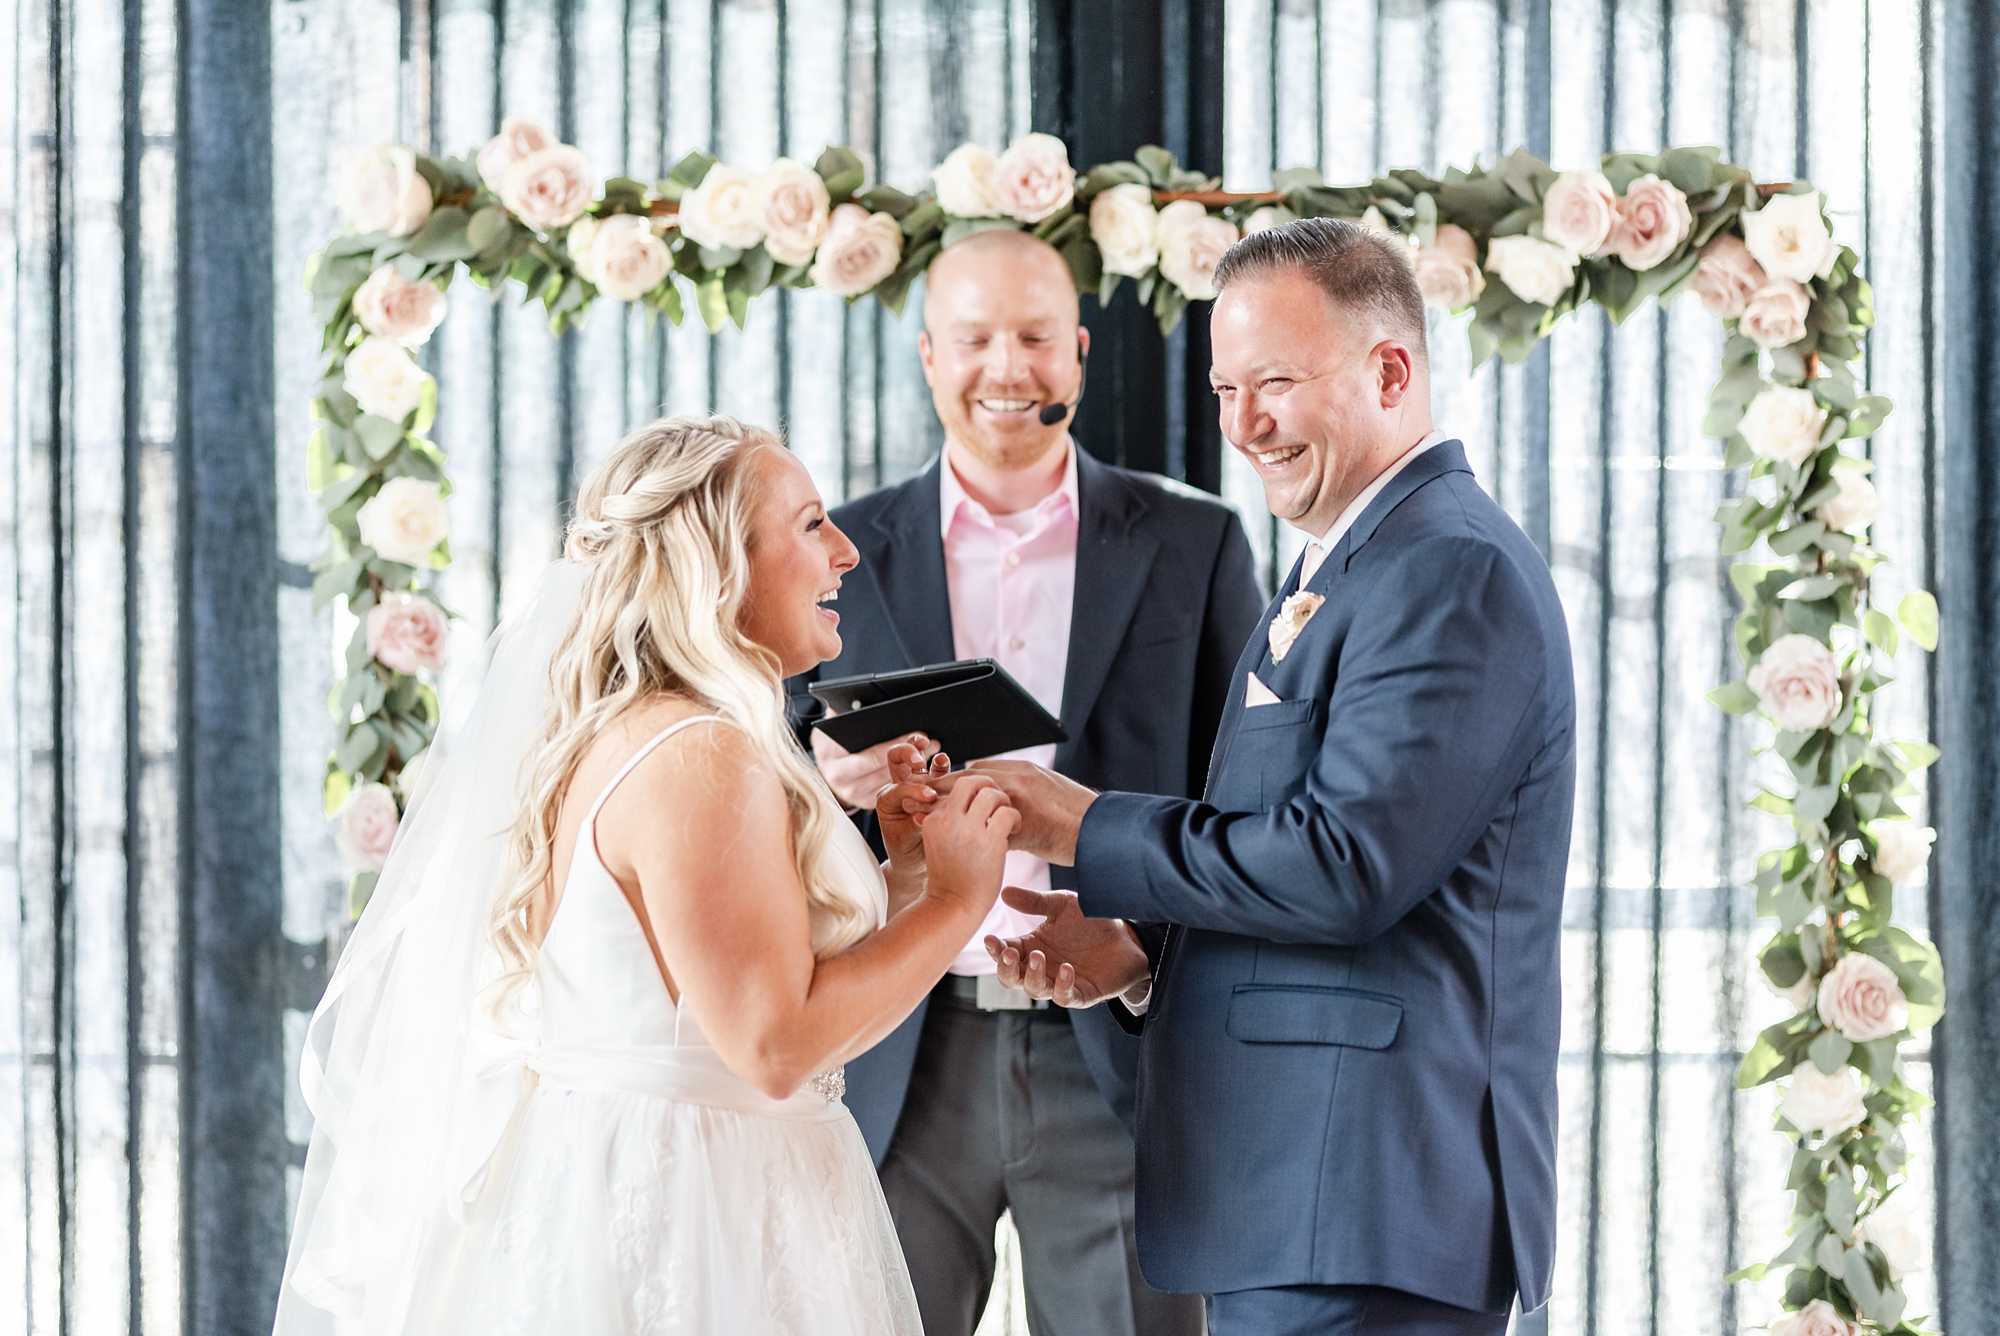 newlyweds laugh together during High Line Car House wedding ceremony by floral arch